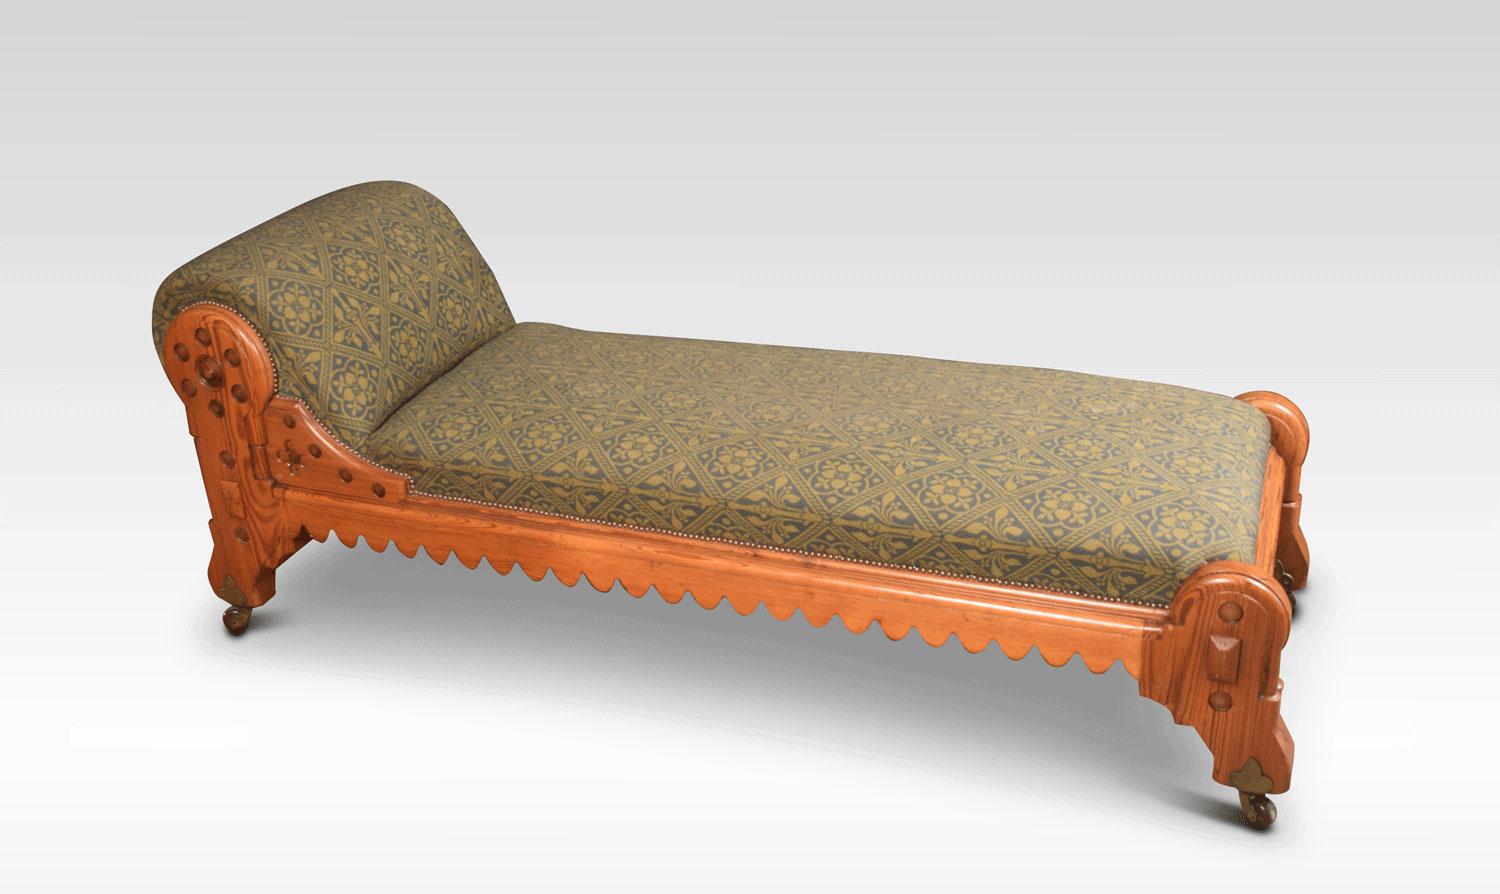 Gothic Revival chaise lounge attributed to Charles Bevan. The pitch pine frame having double column legs and carved crenellated apron all raised up on brass caps and ceramic casters.
Dimensions:
Height 31 inches, height to seat 20 inches
Width